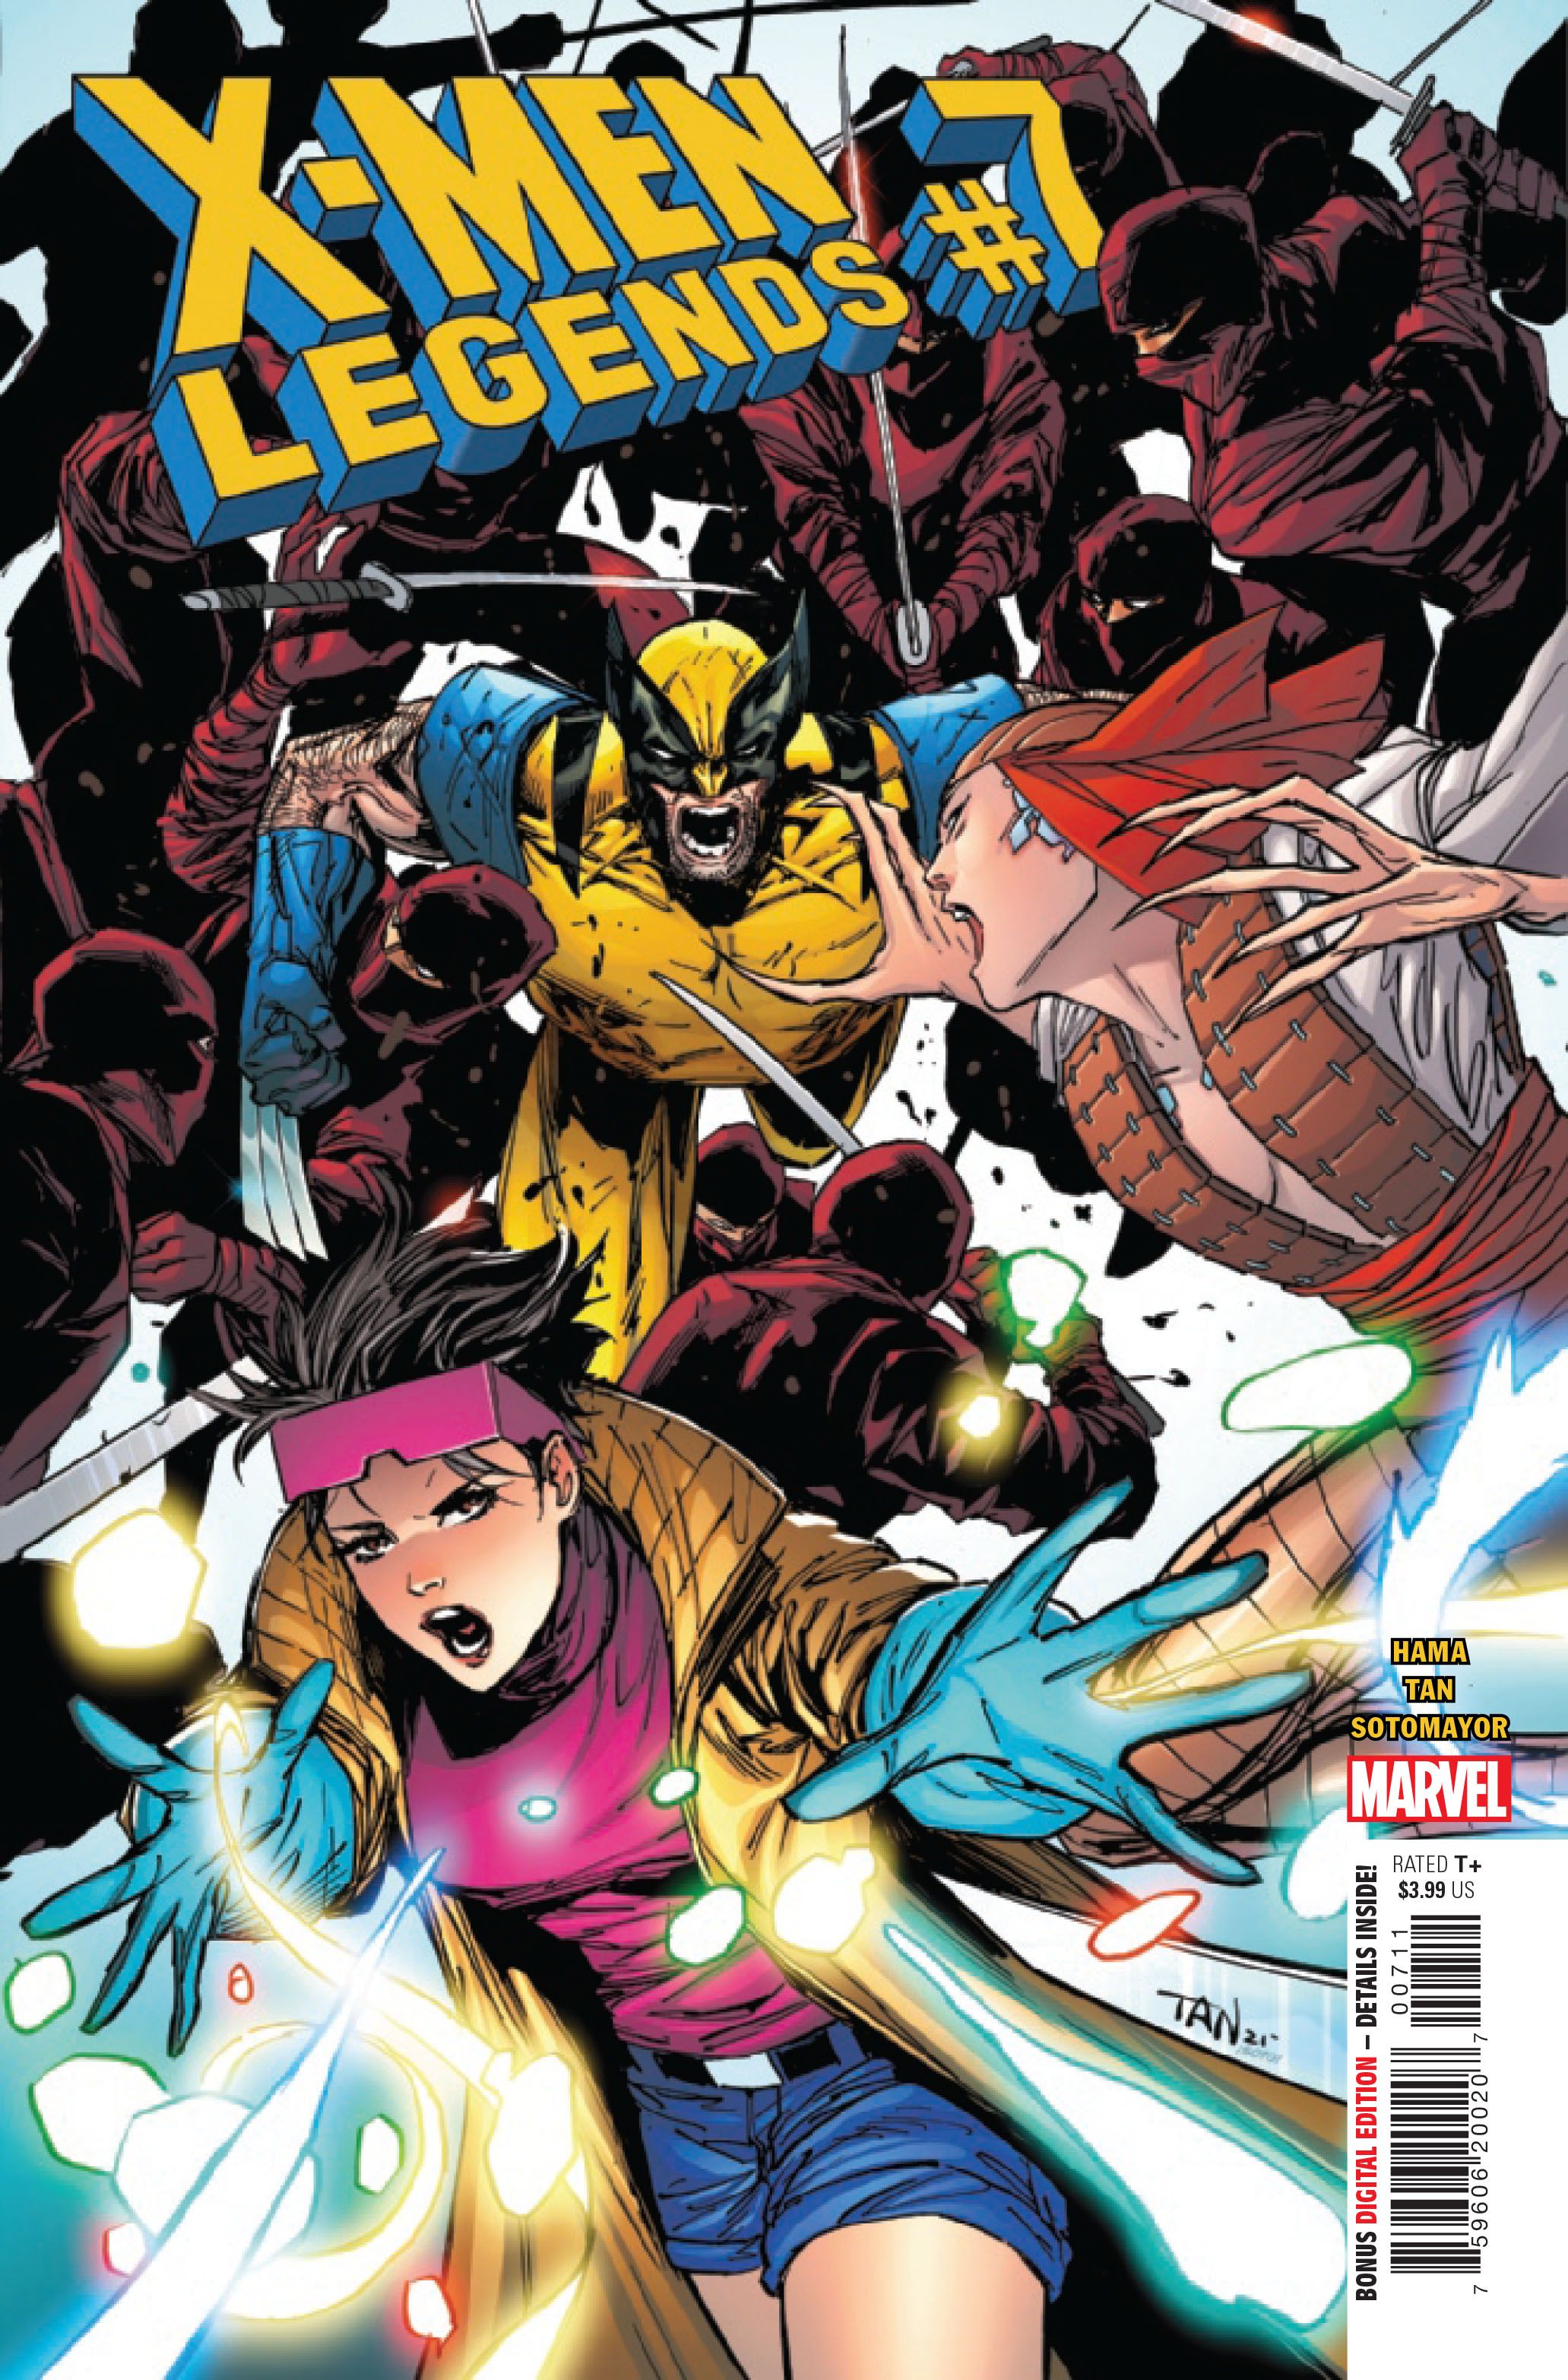 Lady Deathstrike and Wolverine fight on the cover of X-Men Legends #7